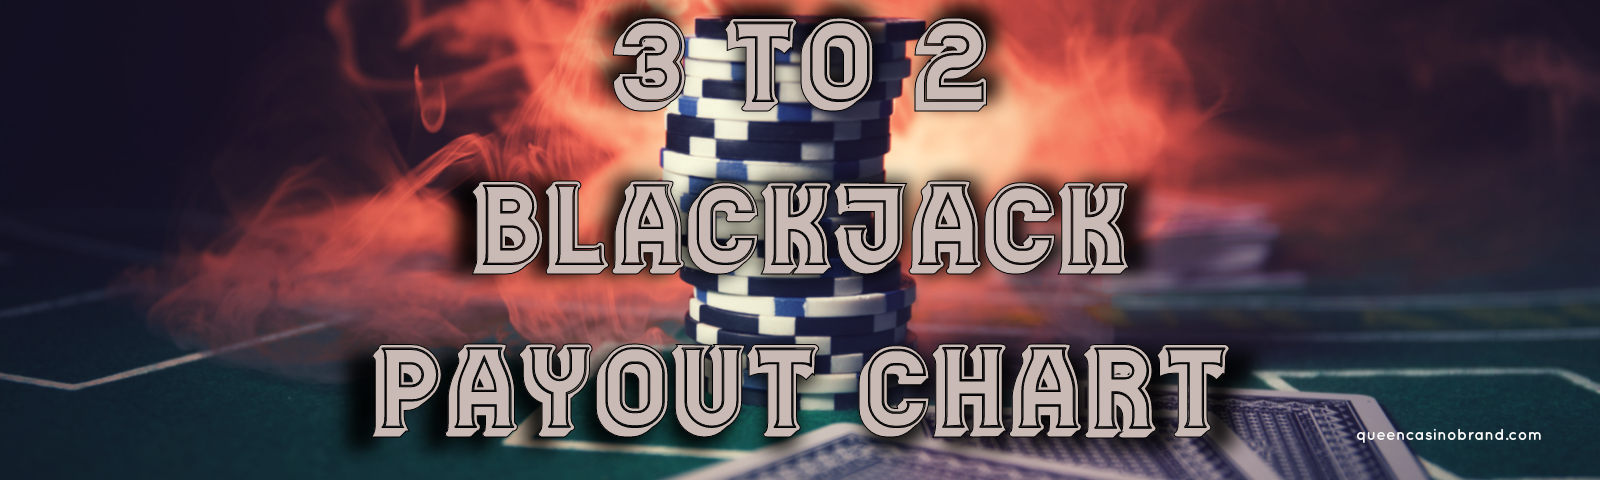 3 to 2 Blackjack Payout Chart | Queen Casino Brand